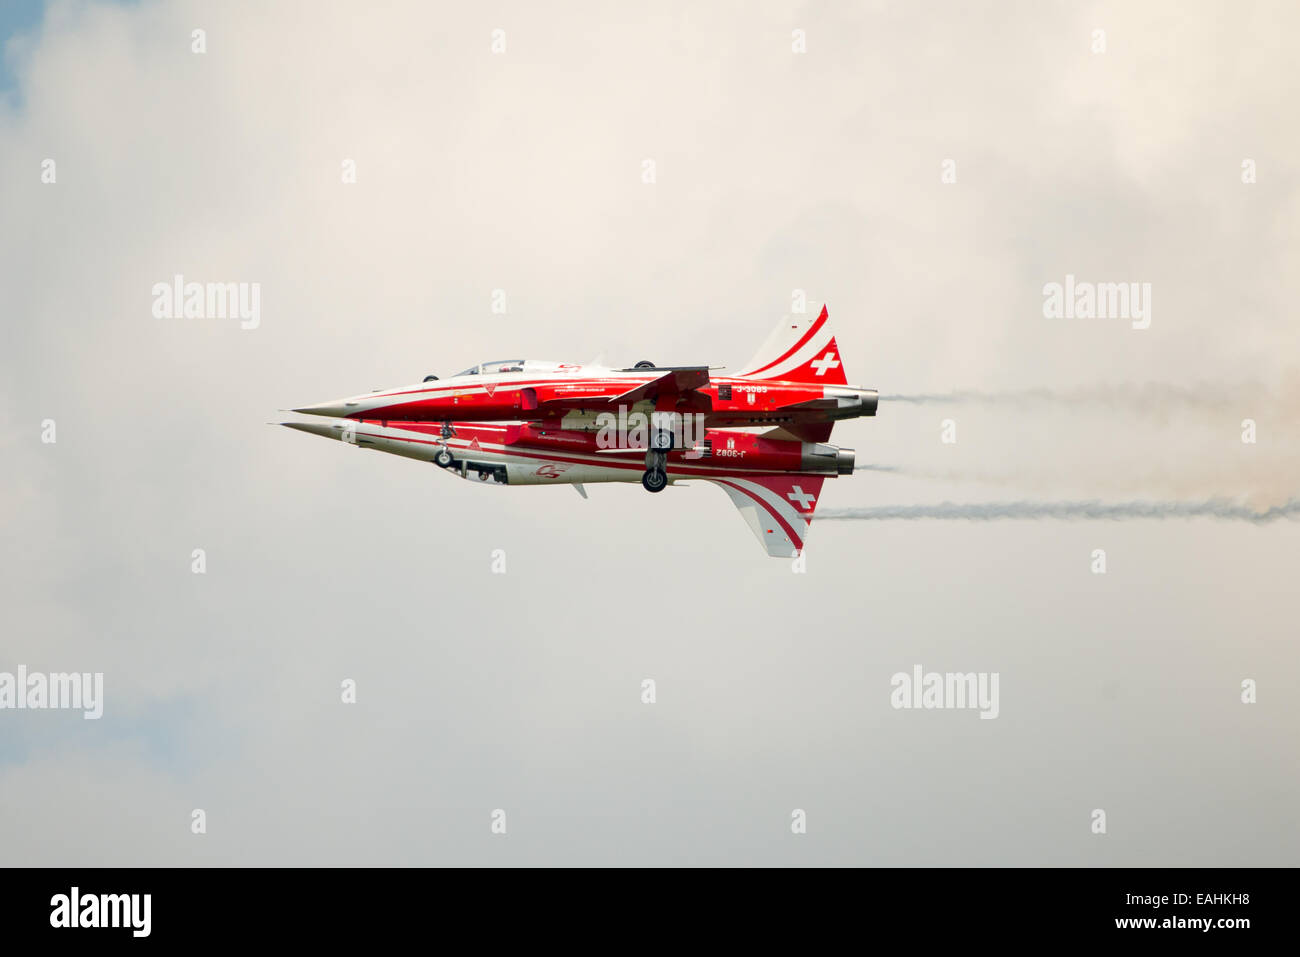 Fairford, UK - 12 July 2014: Patrouille Suisse F5 pair of aircraft displaying at the Royal International Air Tattoo. Stock Photo